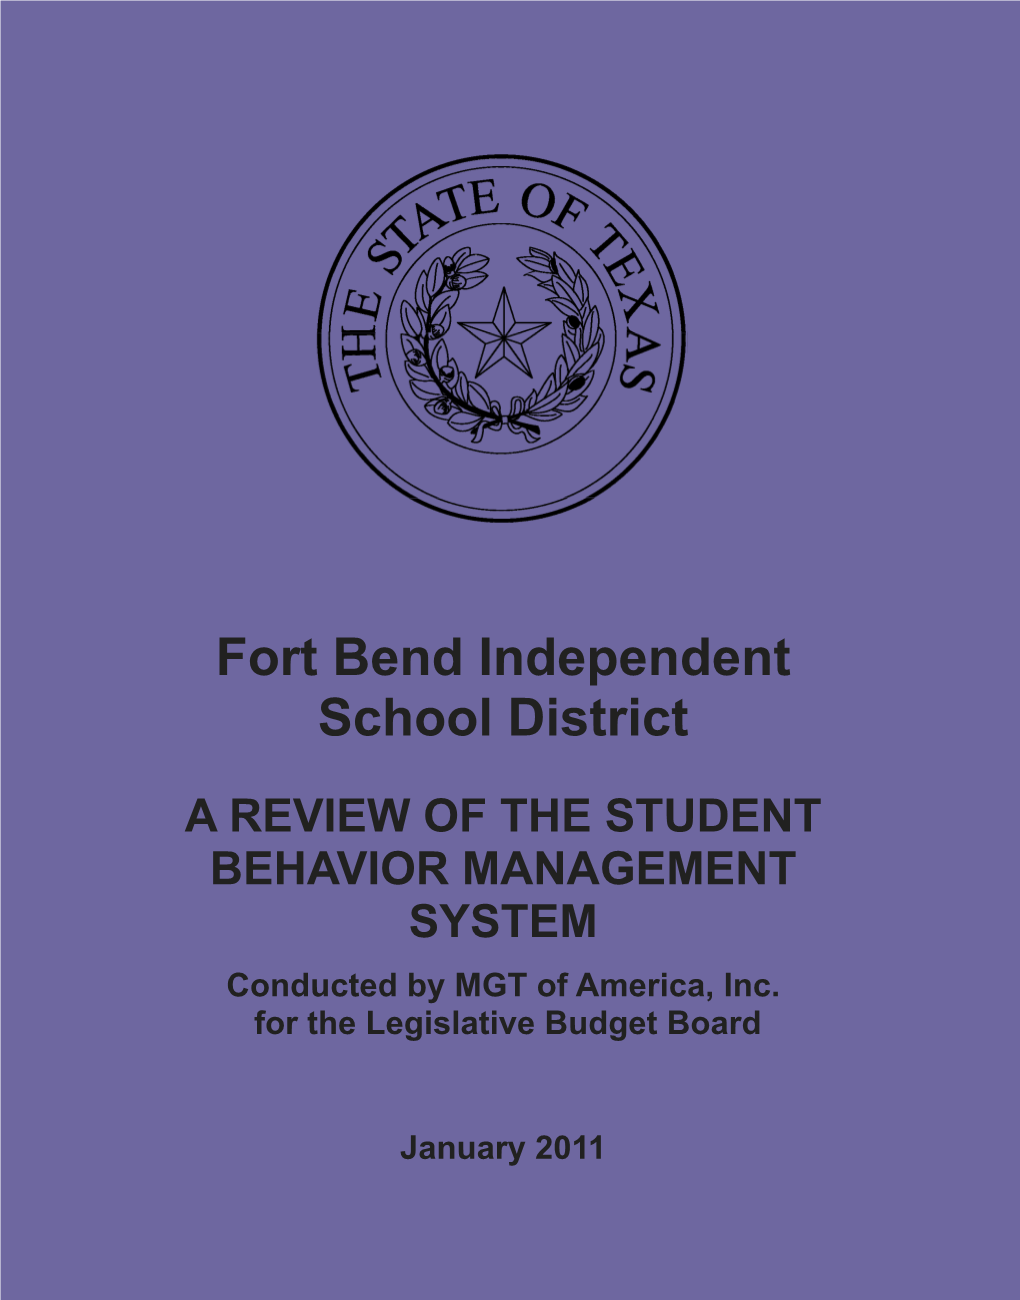 Fort Bend ISD School Review